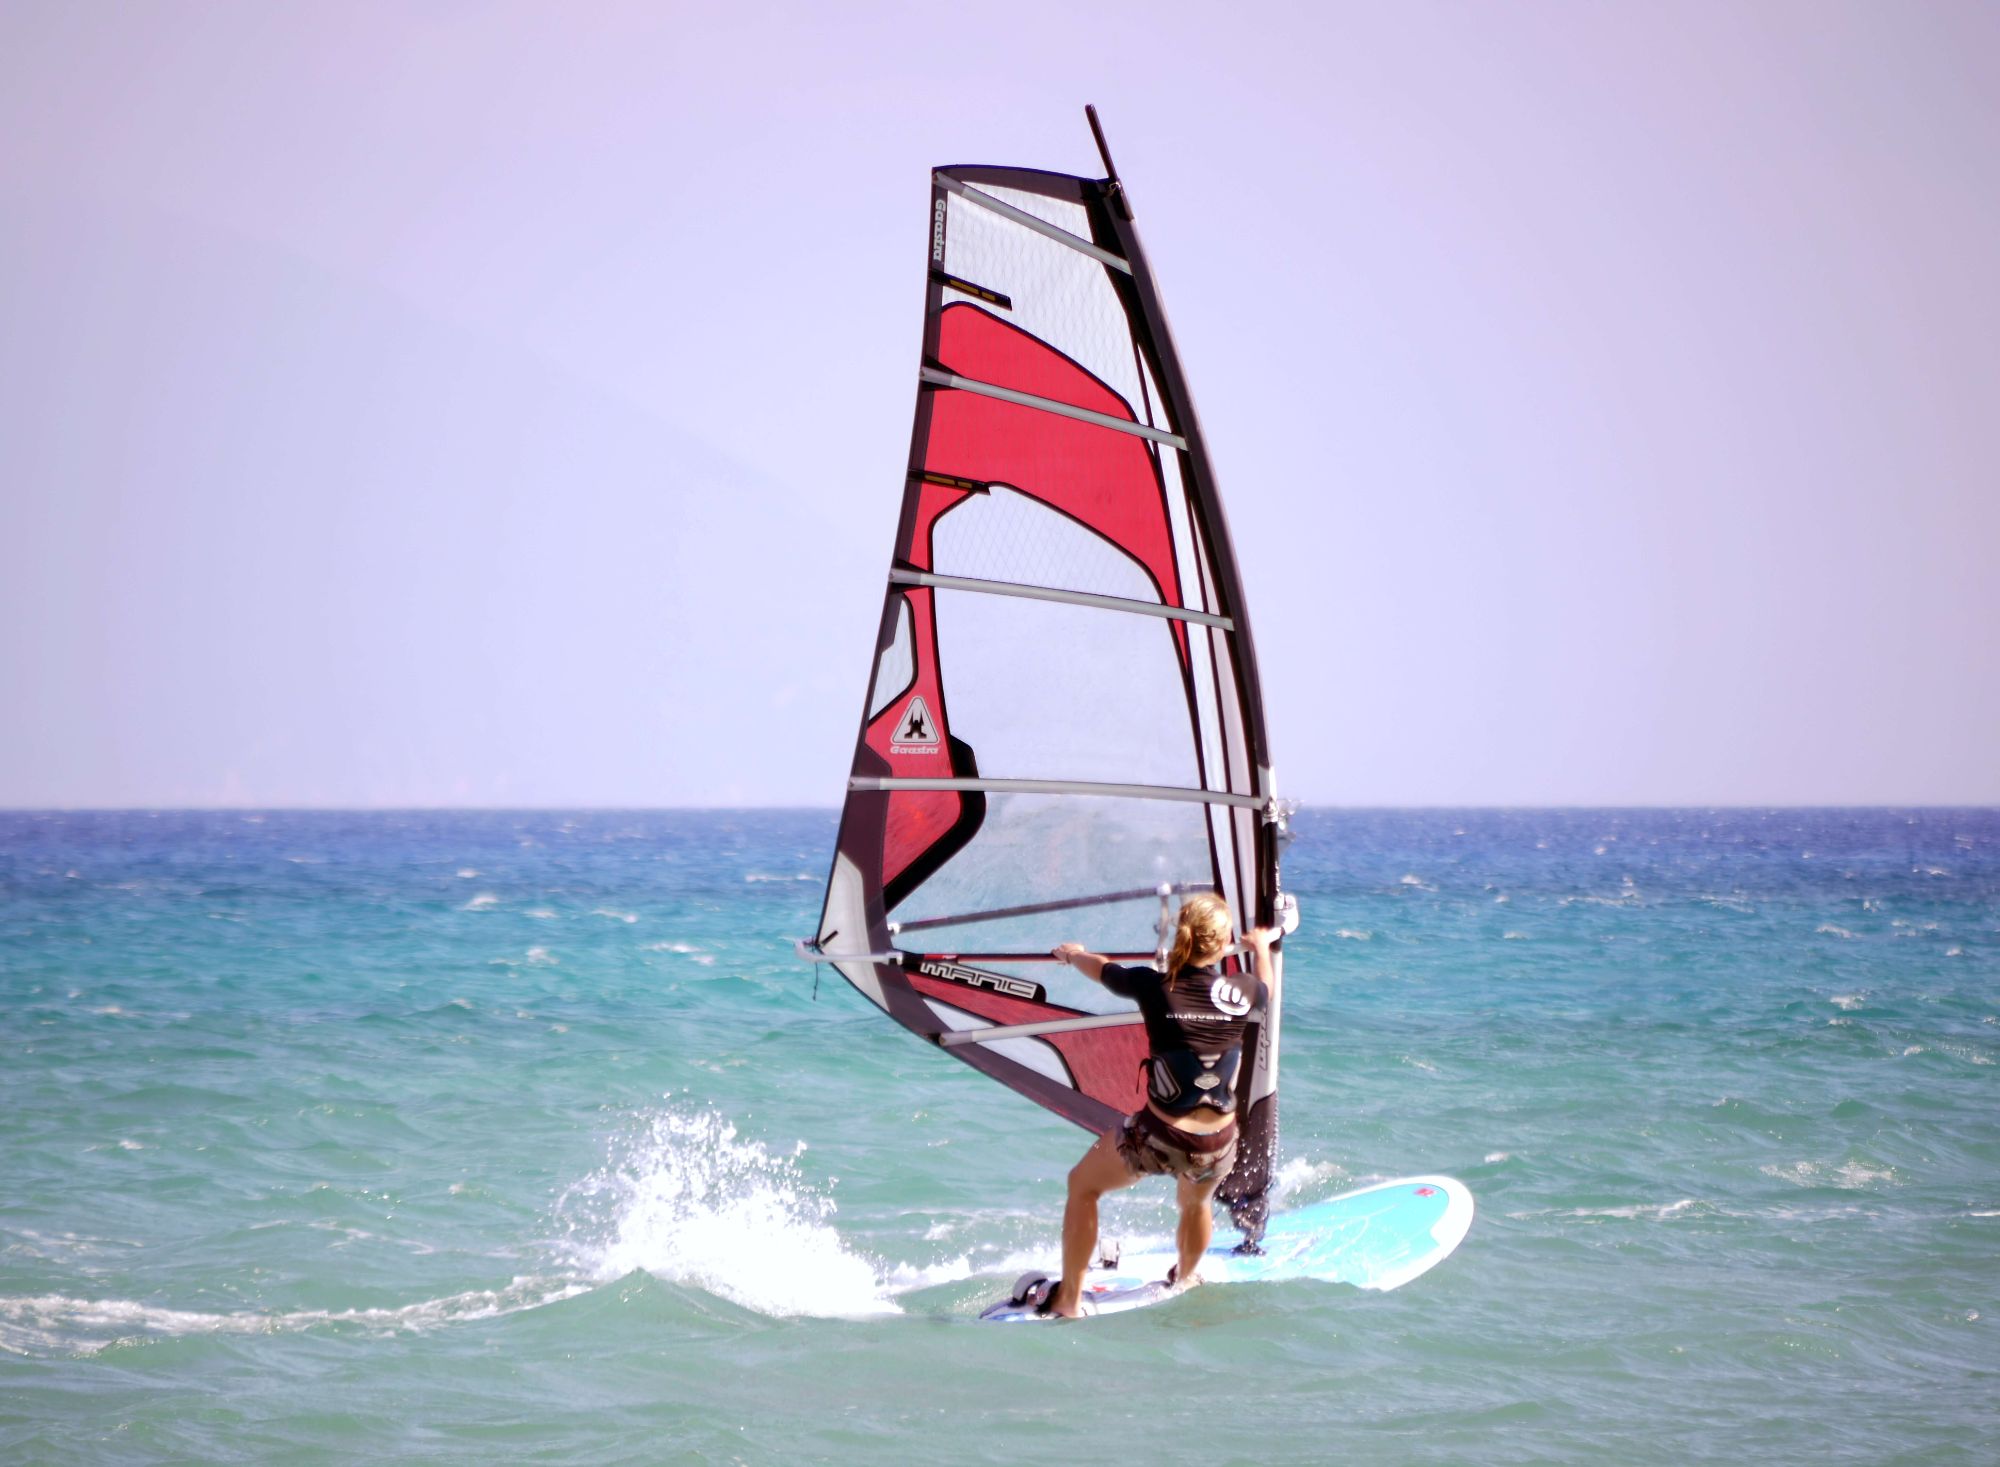 Lady is windsurfing around a yacht